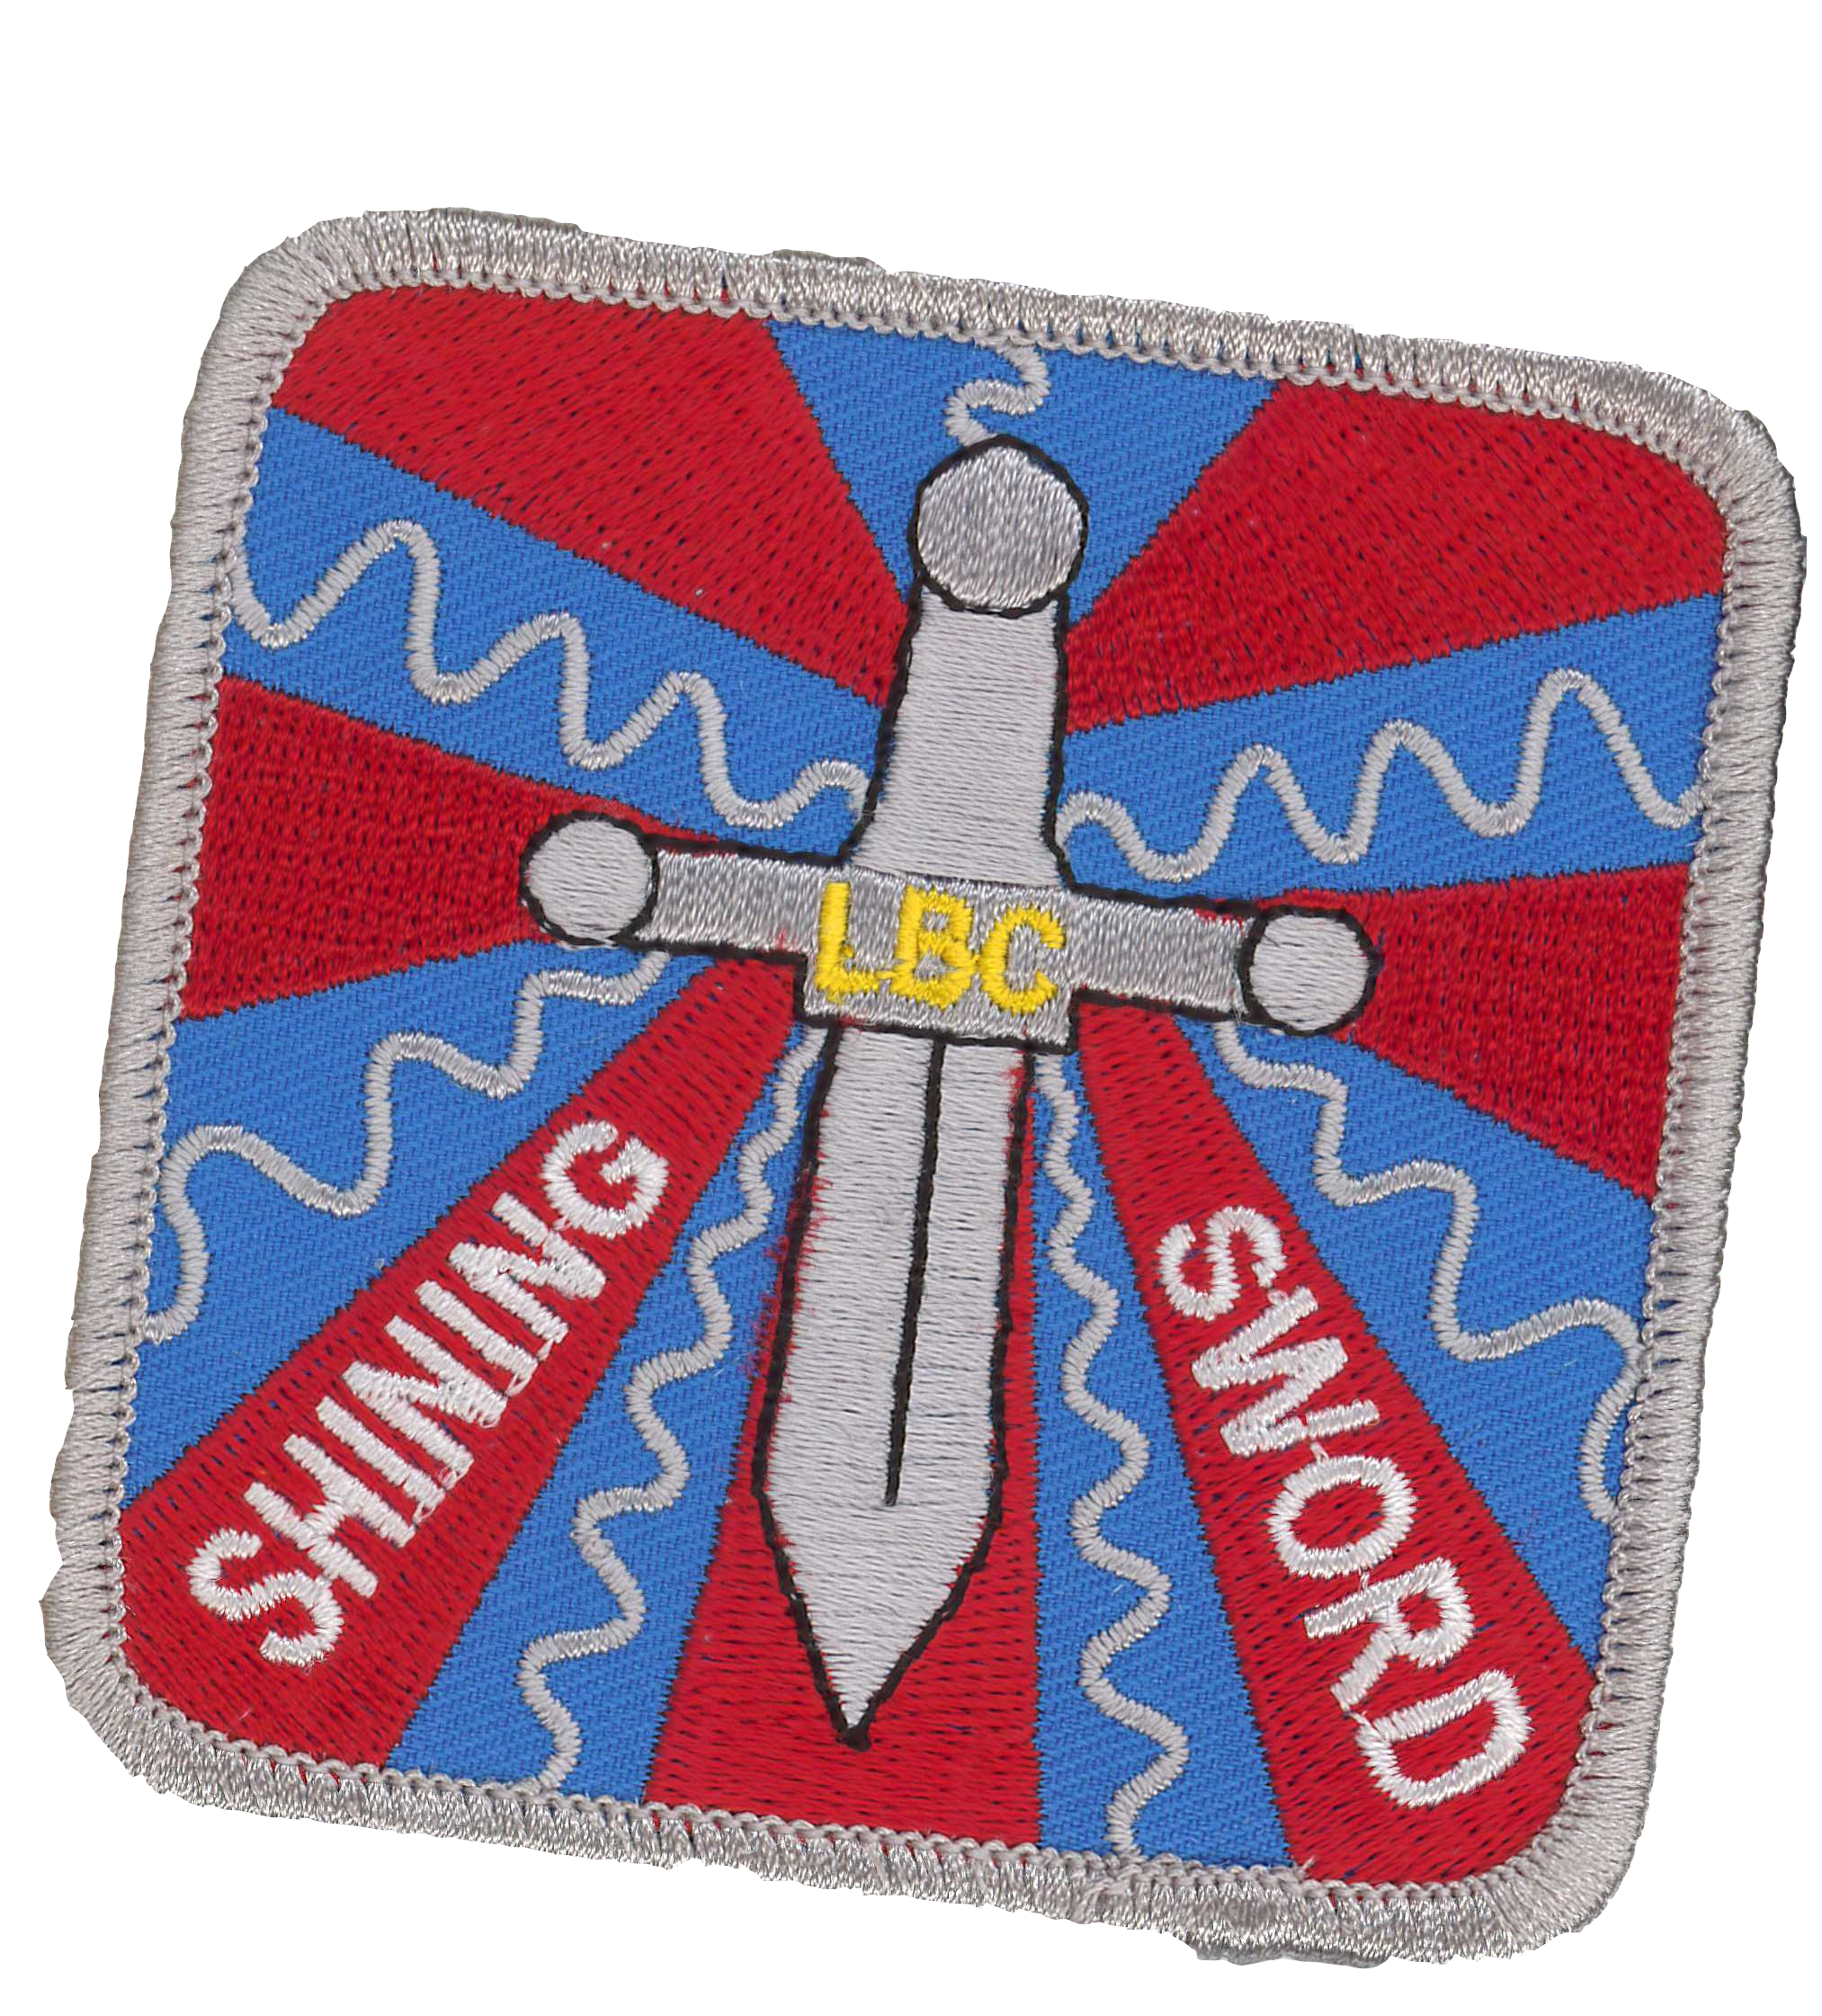 Silver Shining Sword Patch.png